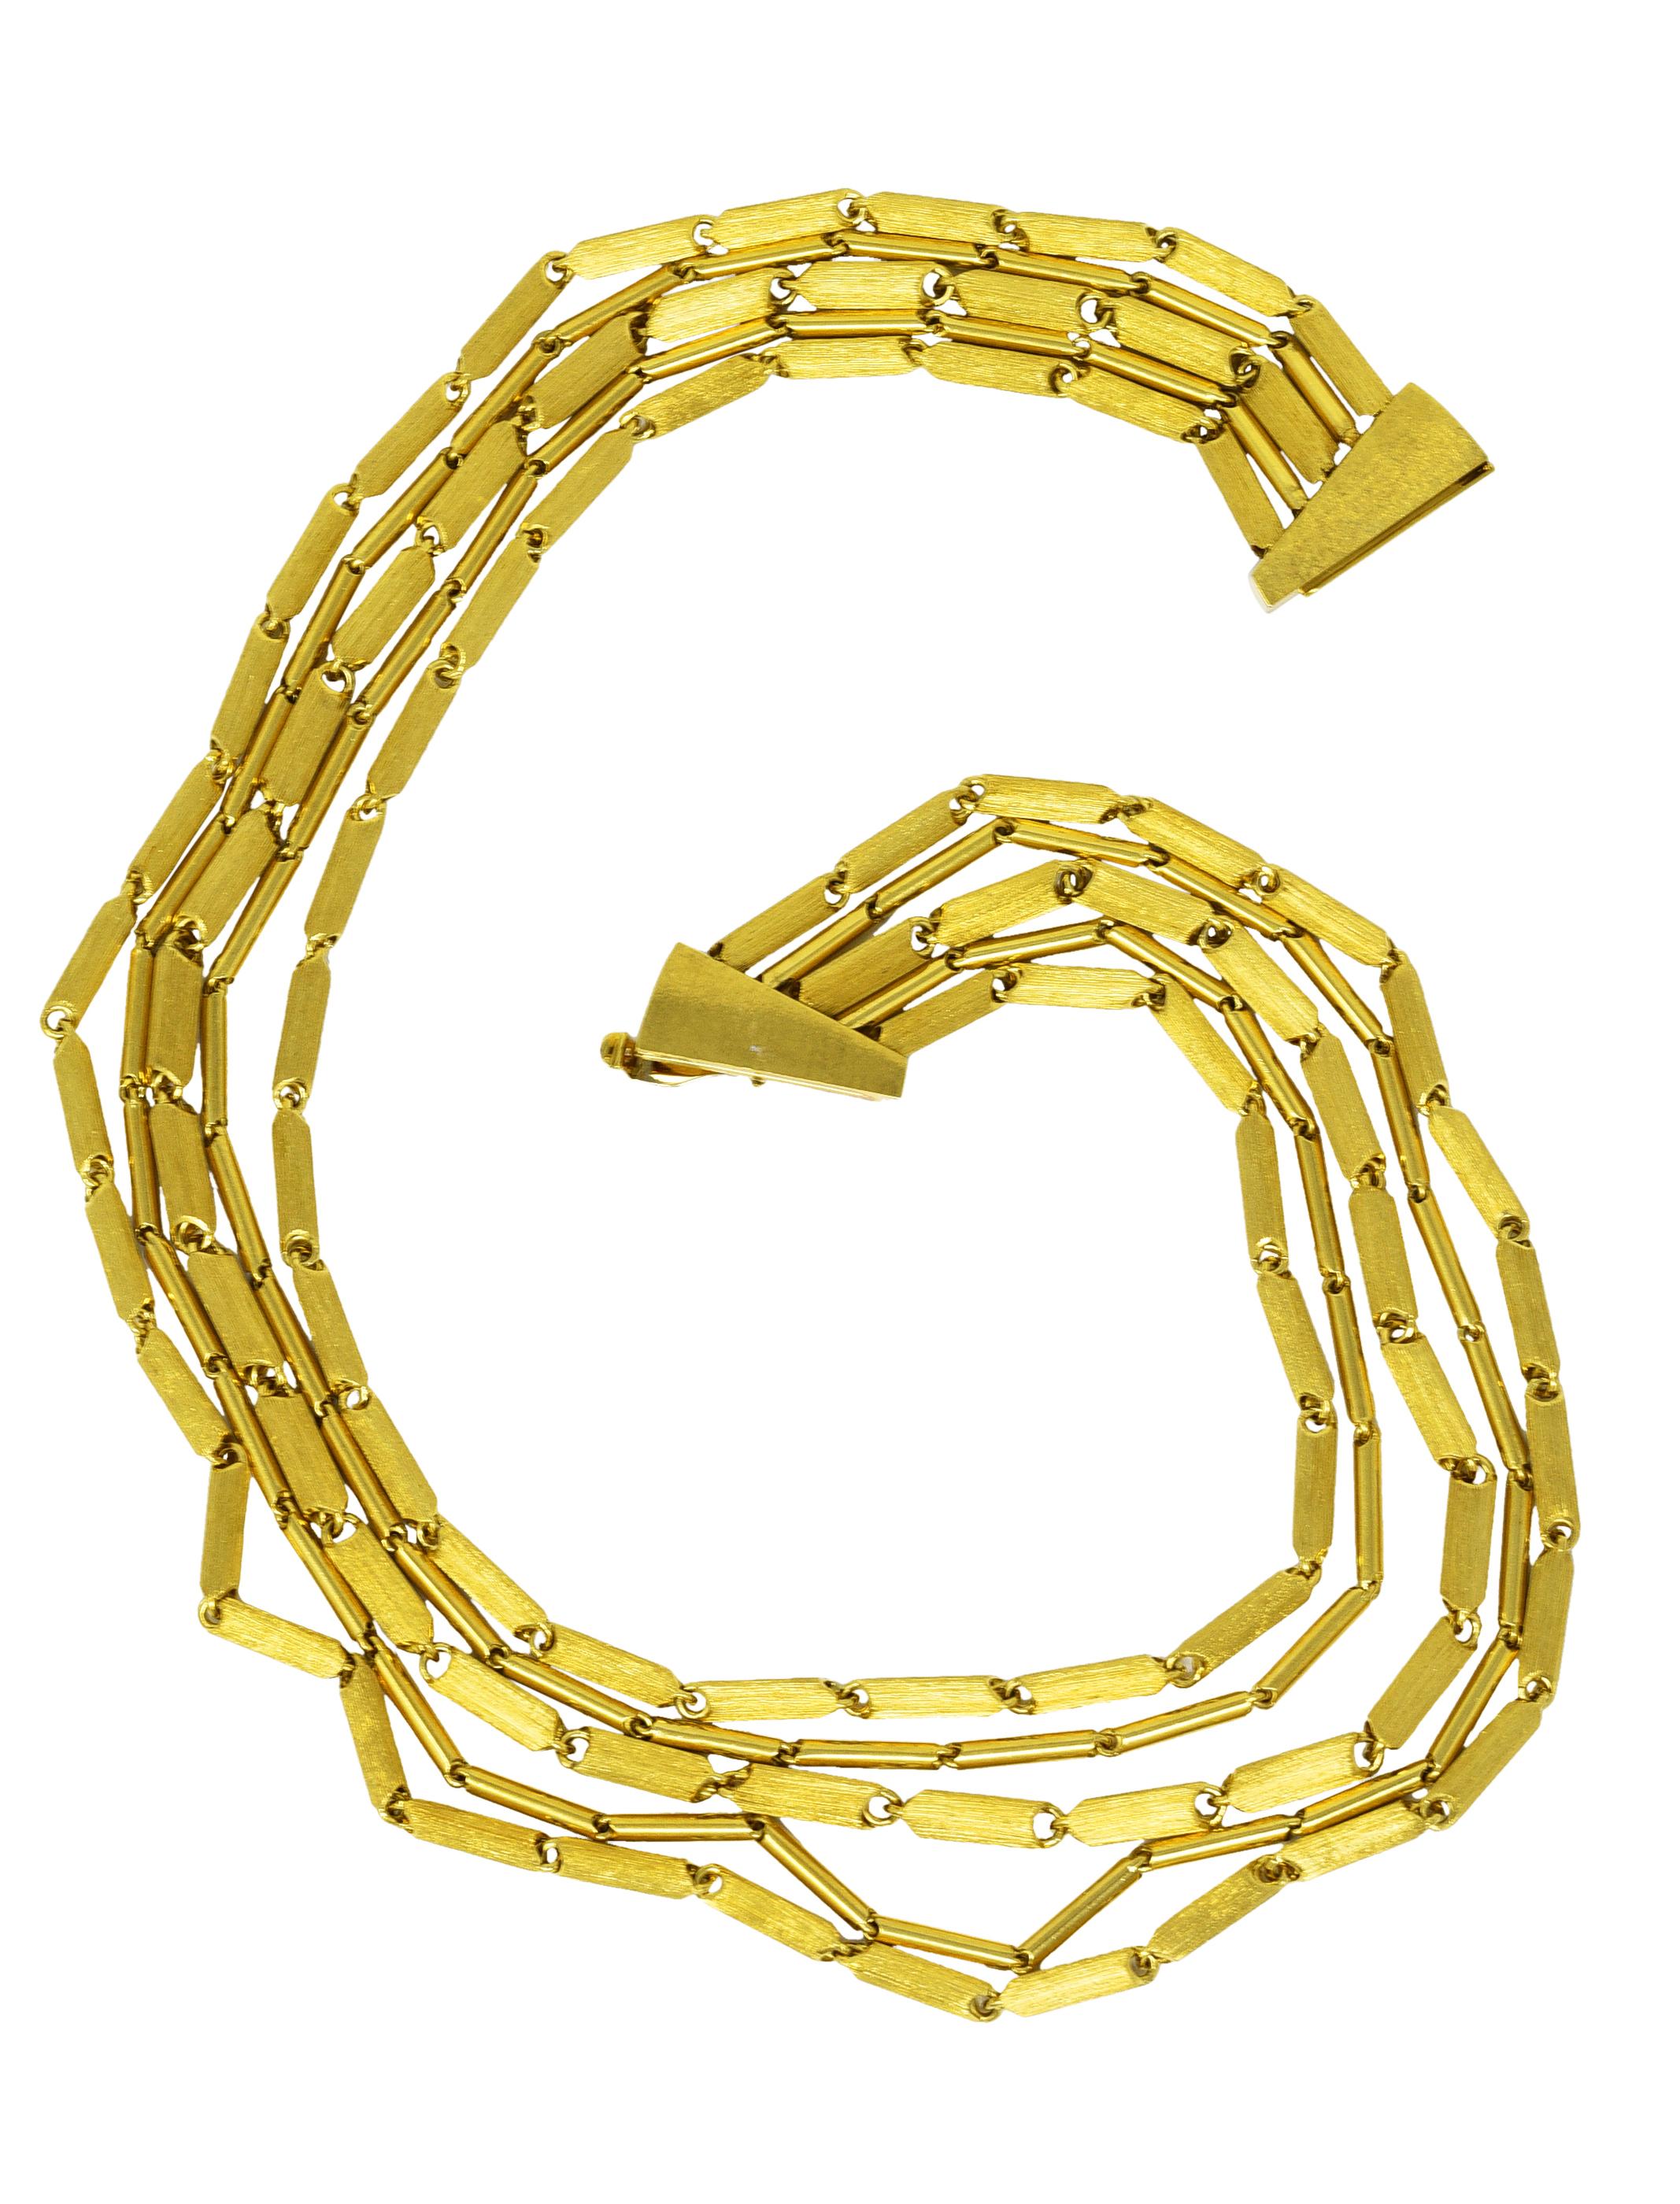 Necklace is designed as five tiered strands of stylized chevron barrel link chains. Strands alternate between wide brushed gold links and thin high polished links. Completed by stylized matte gold slide closure with hinged safety. Stamped 750 and